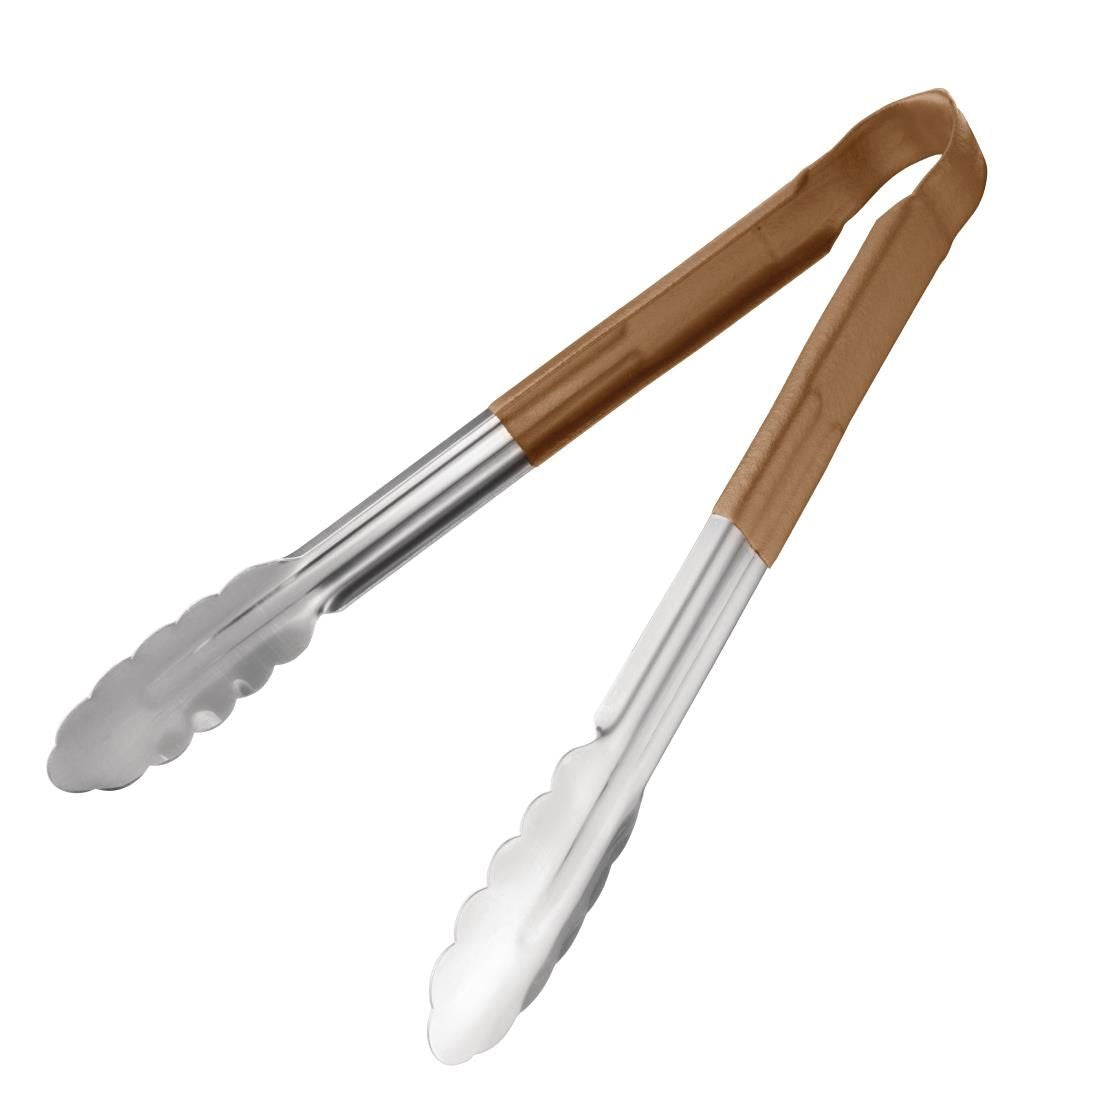 CB158 Vogue Colour Coded Brown Serving Tongs 11"